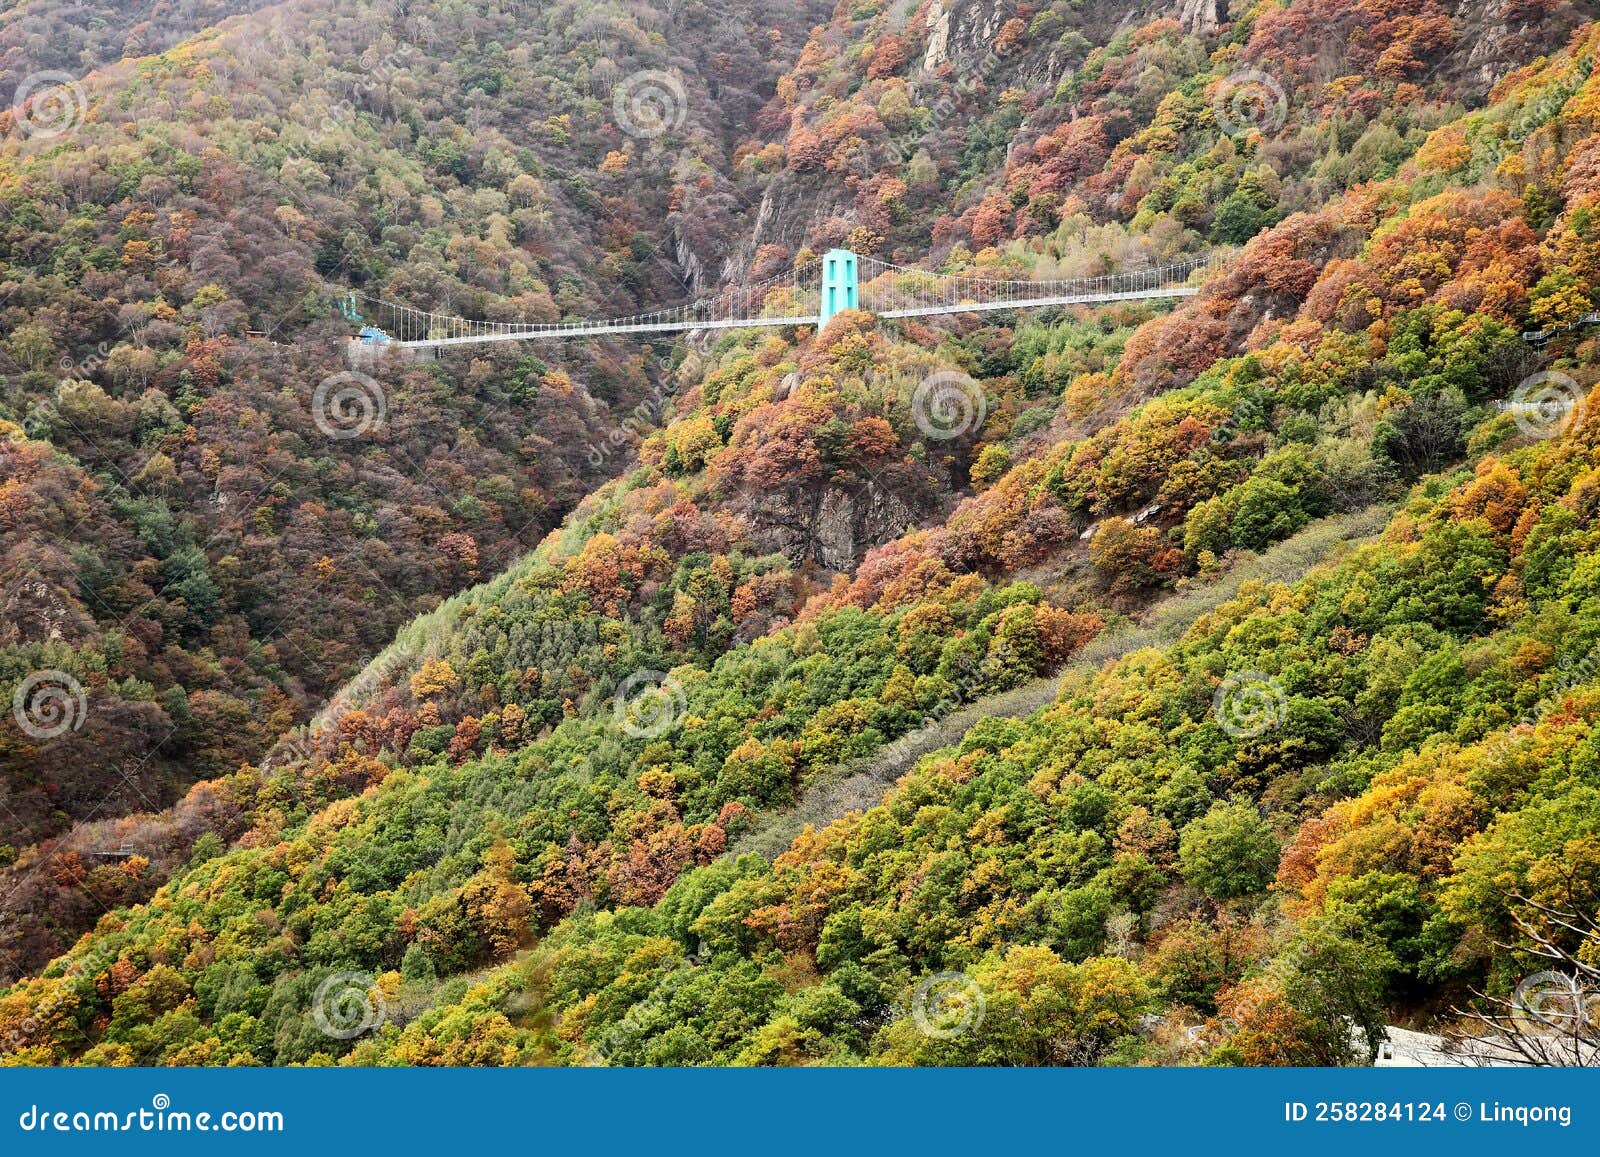 a glass trestle is located in the mountains with charming autumn scenery